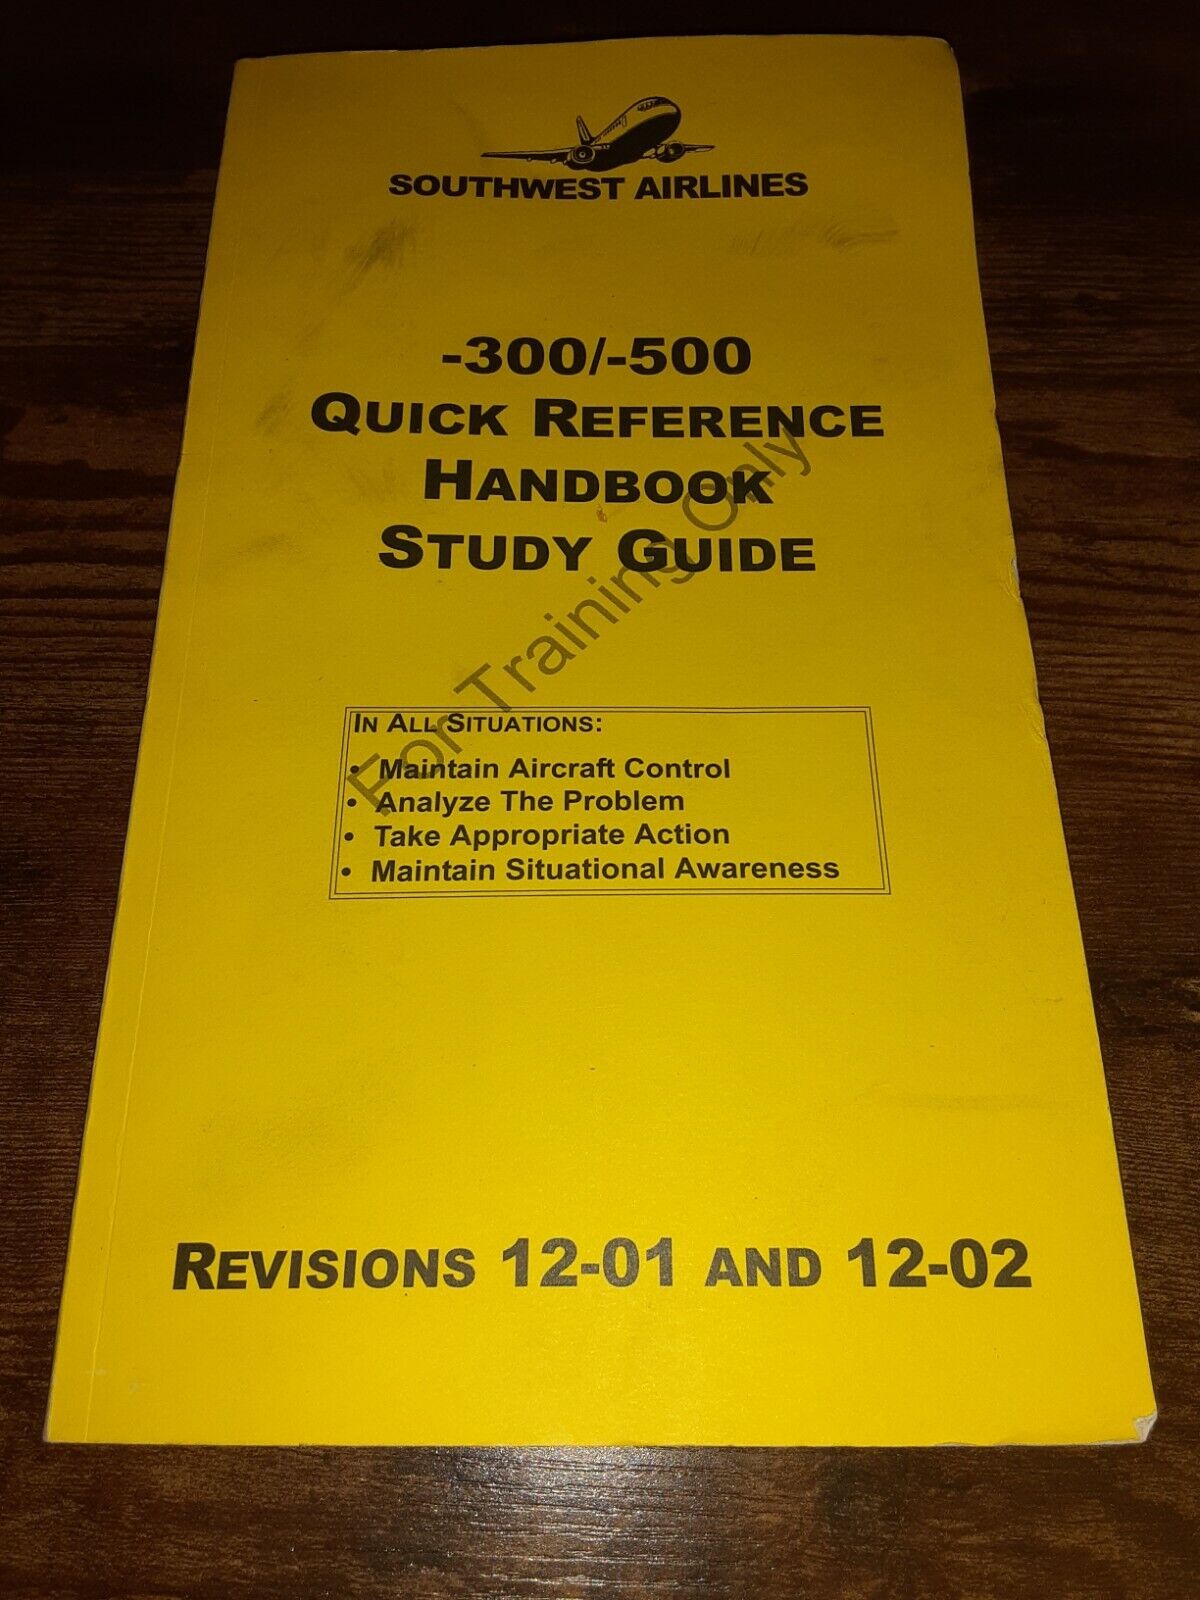 Vintage Southwest Airlines -300/-500 -700 Quick Reference Handbook Study Guide ☆